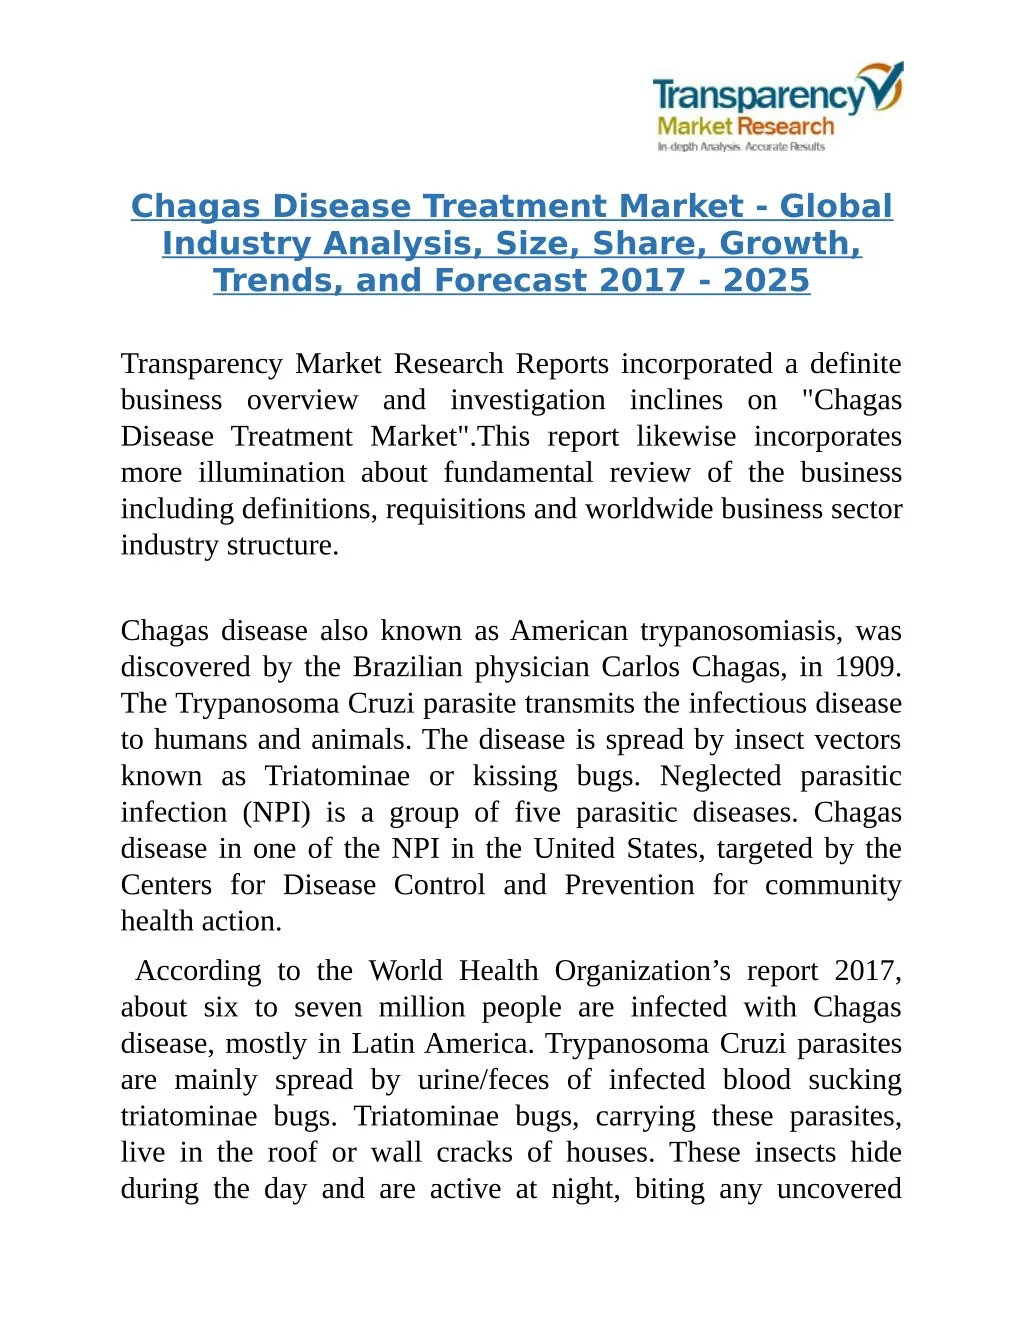 chagas disease treatment market global industry